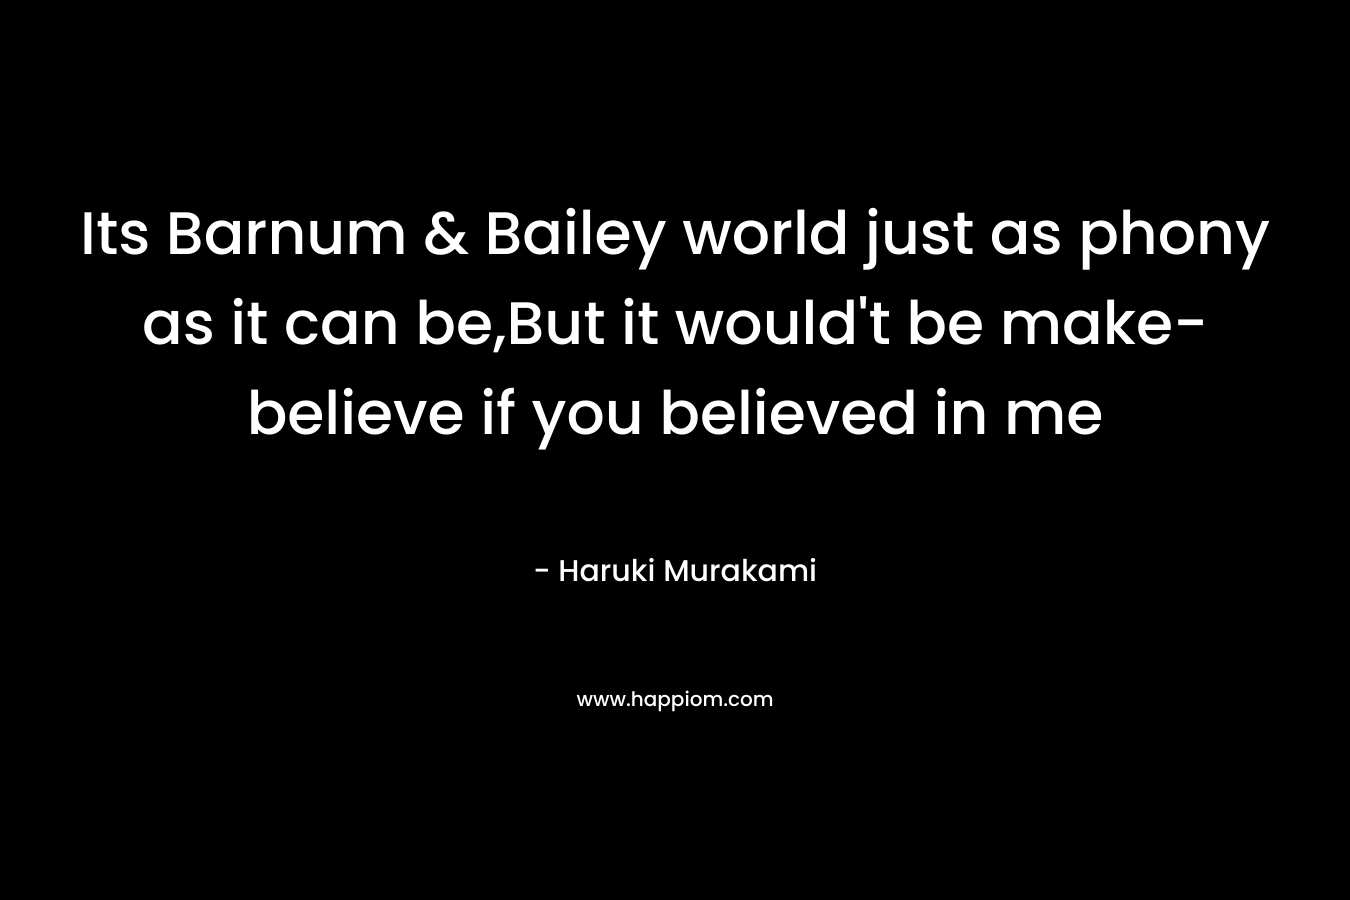 Its Barnum & Bailey world just as phony as it can be,But it would’t be make-believe if you believed in me – Haruki Murakami